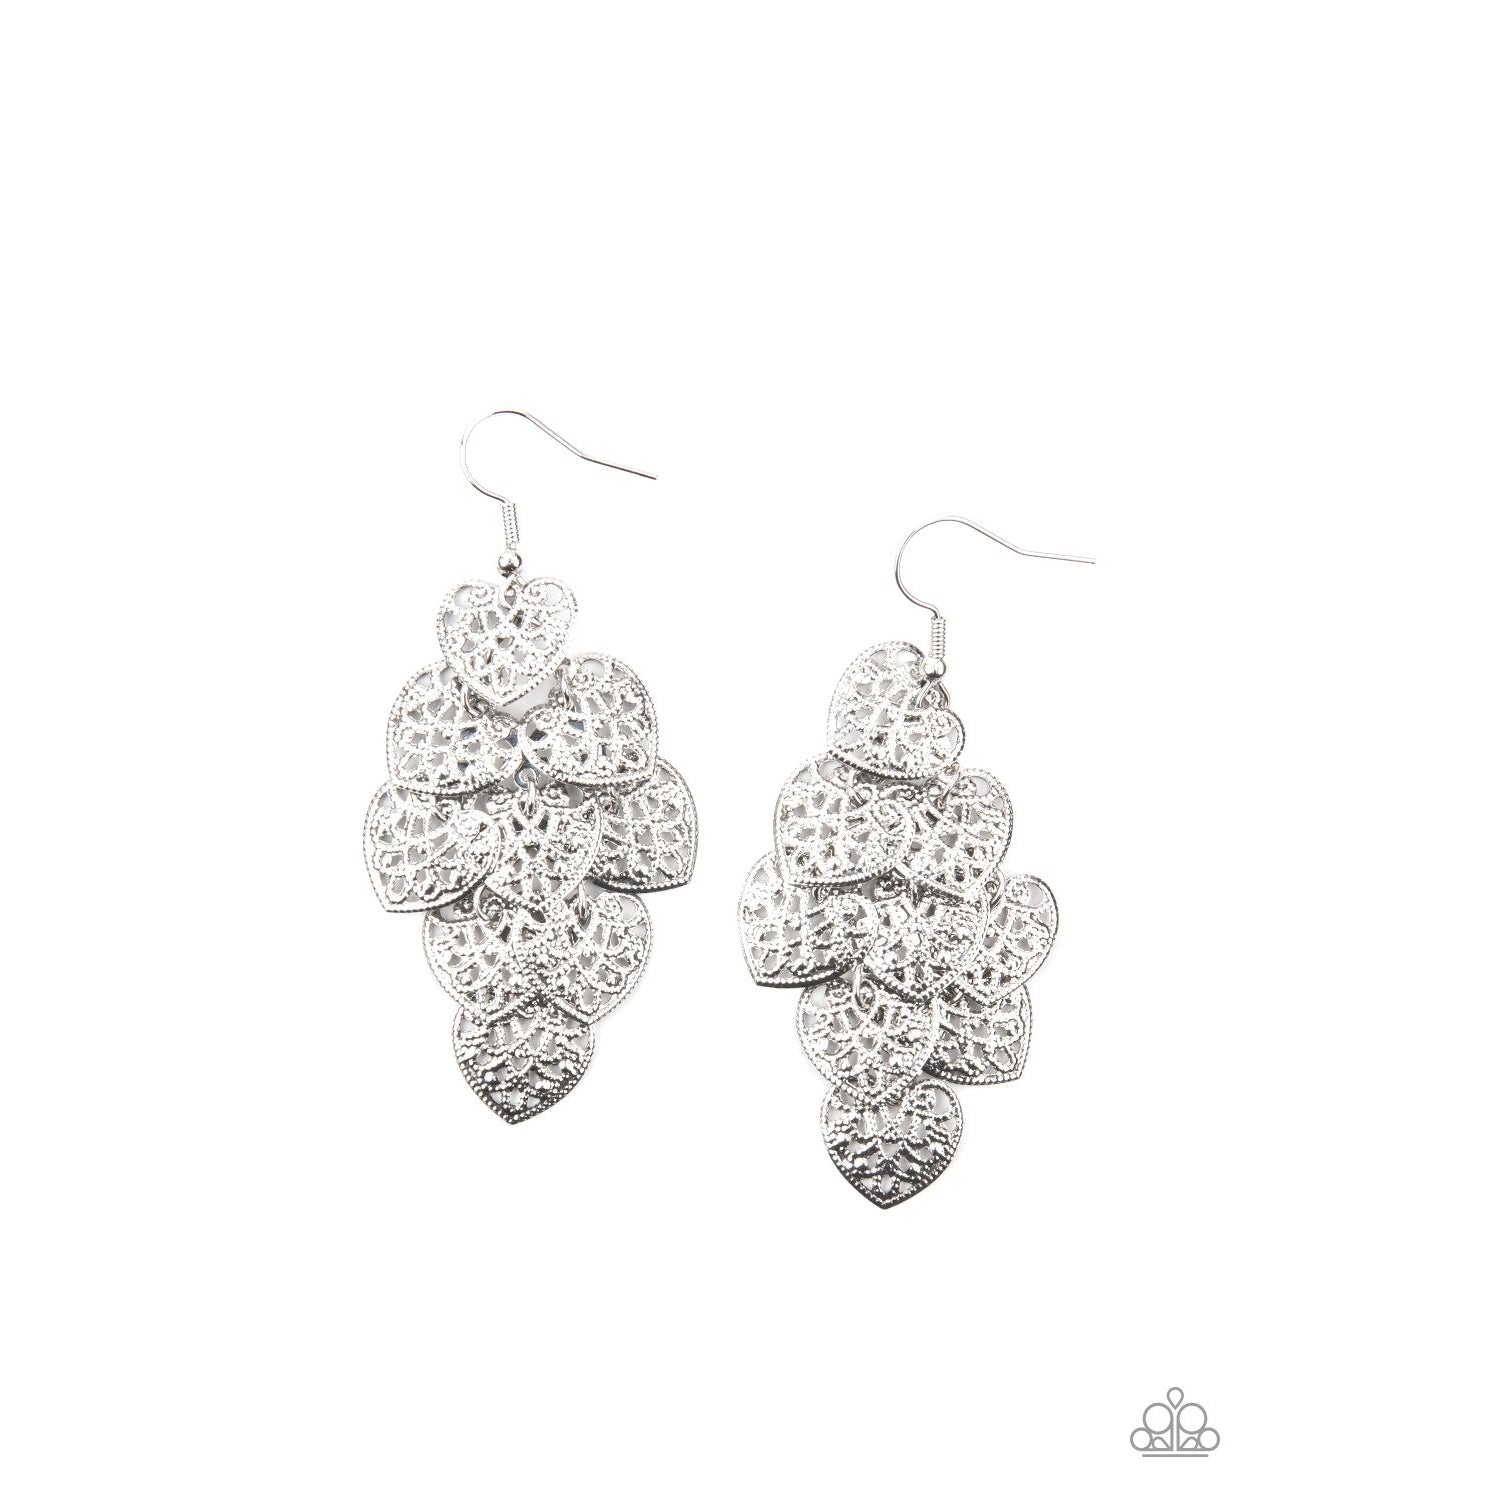 Shimmery Soulmates - Silver Heart Earrings - Paparazzi Accessories - GlaMarous Titi Jewels